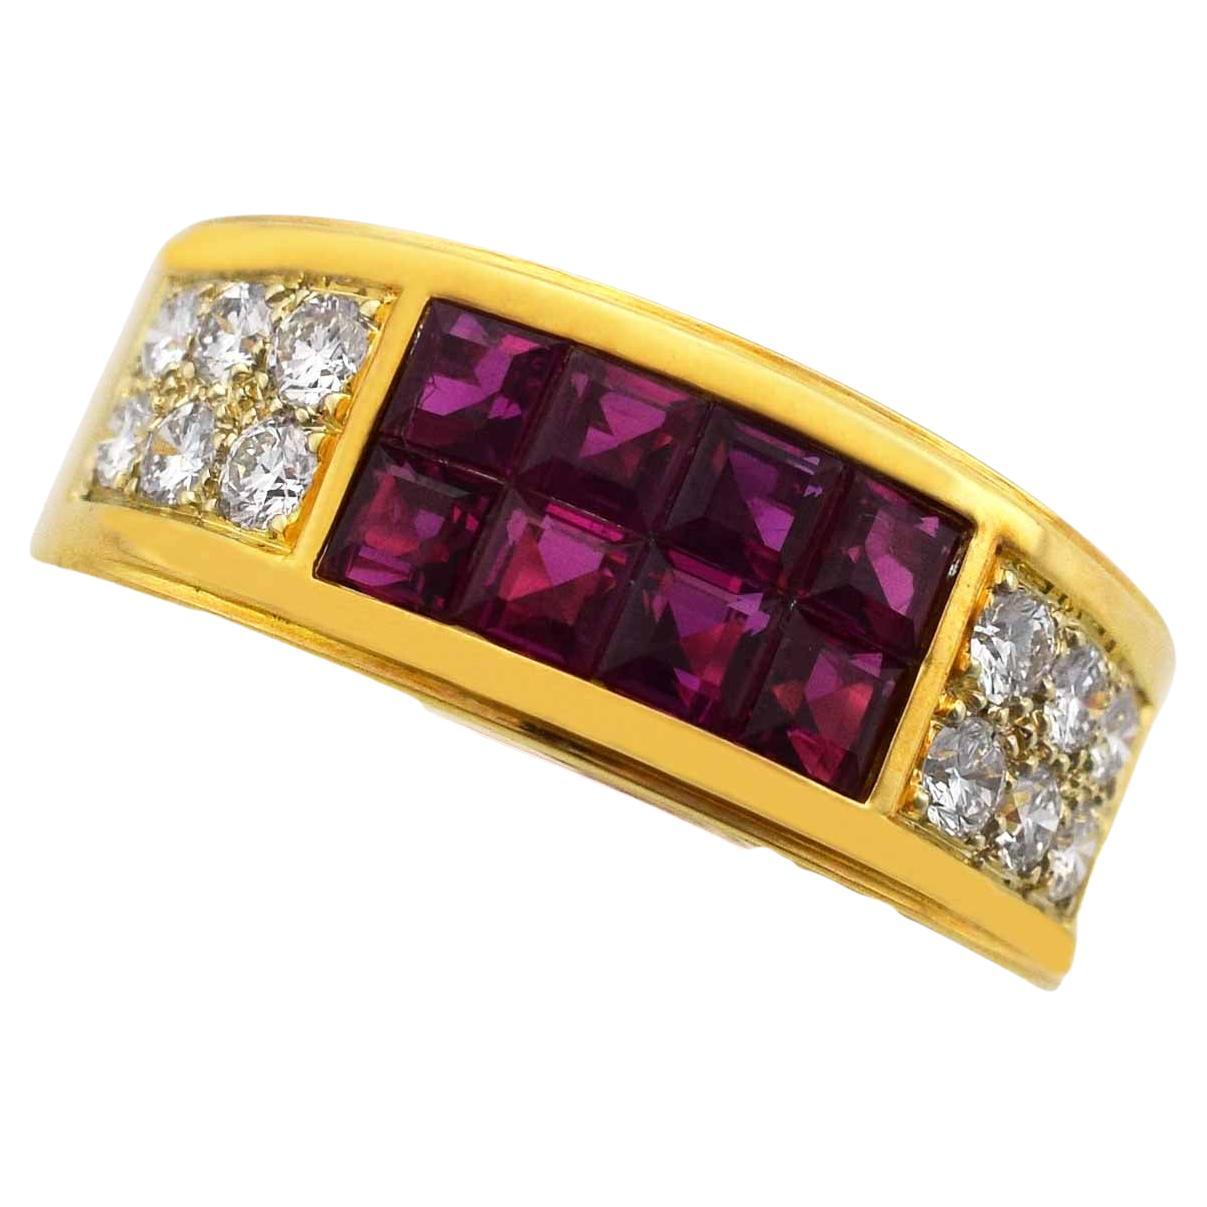 Cartier 18 Karat Yellow Gold Diabolo Diamond Mystery Invisible Set Ruby Ring For Sale